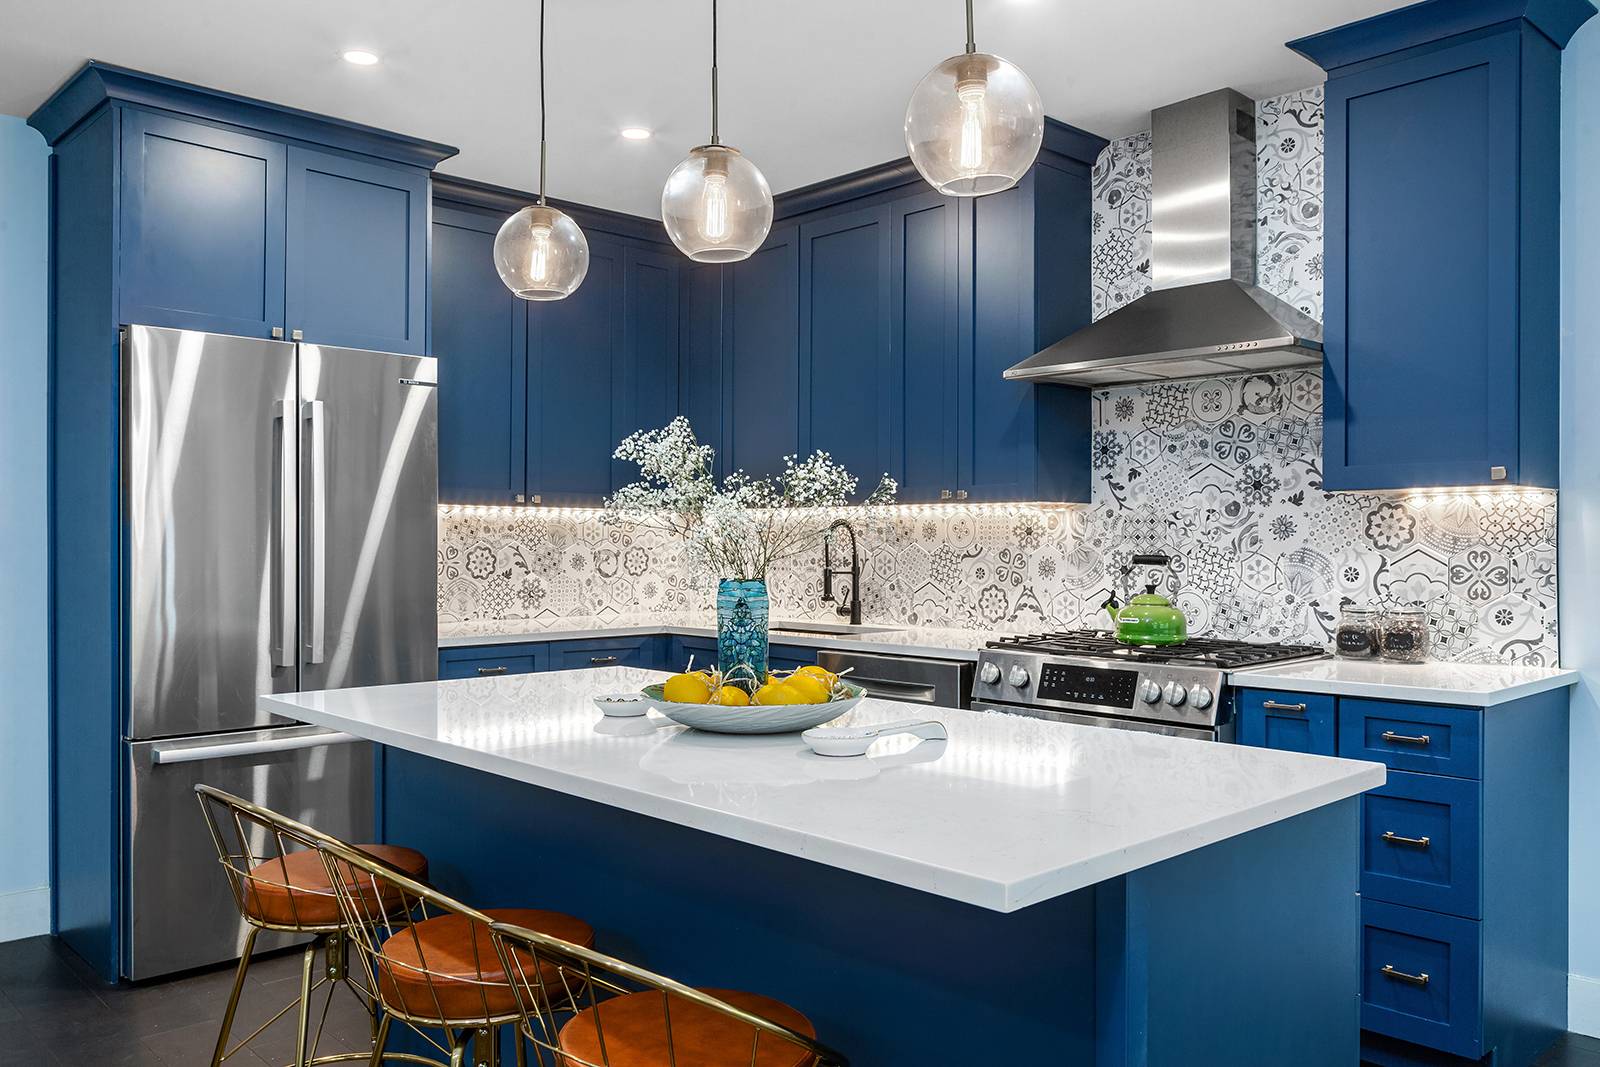 Boasting nearly 1, 200 square feet, this home has undergone a complete transformation and offers a renovated kitchen with beautiful blue cabinetry, Quartz countertops, top of the line Bosh kitchen ...